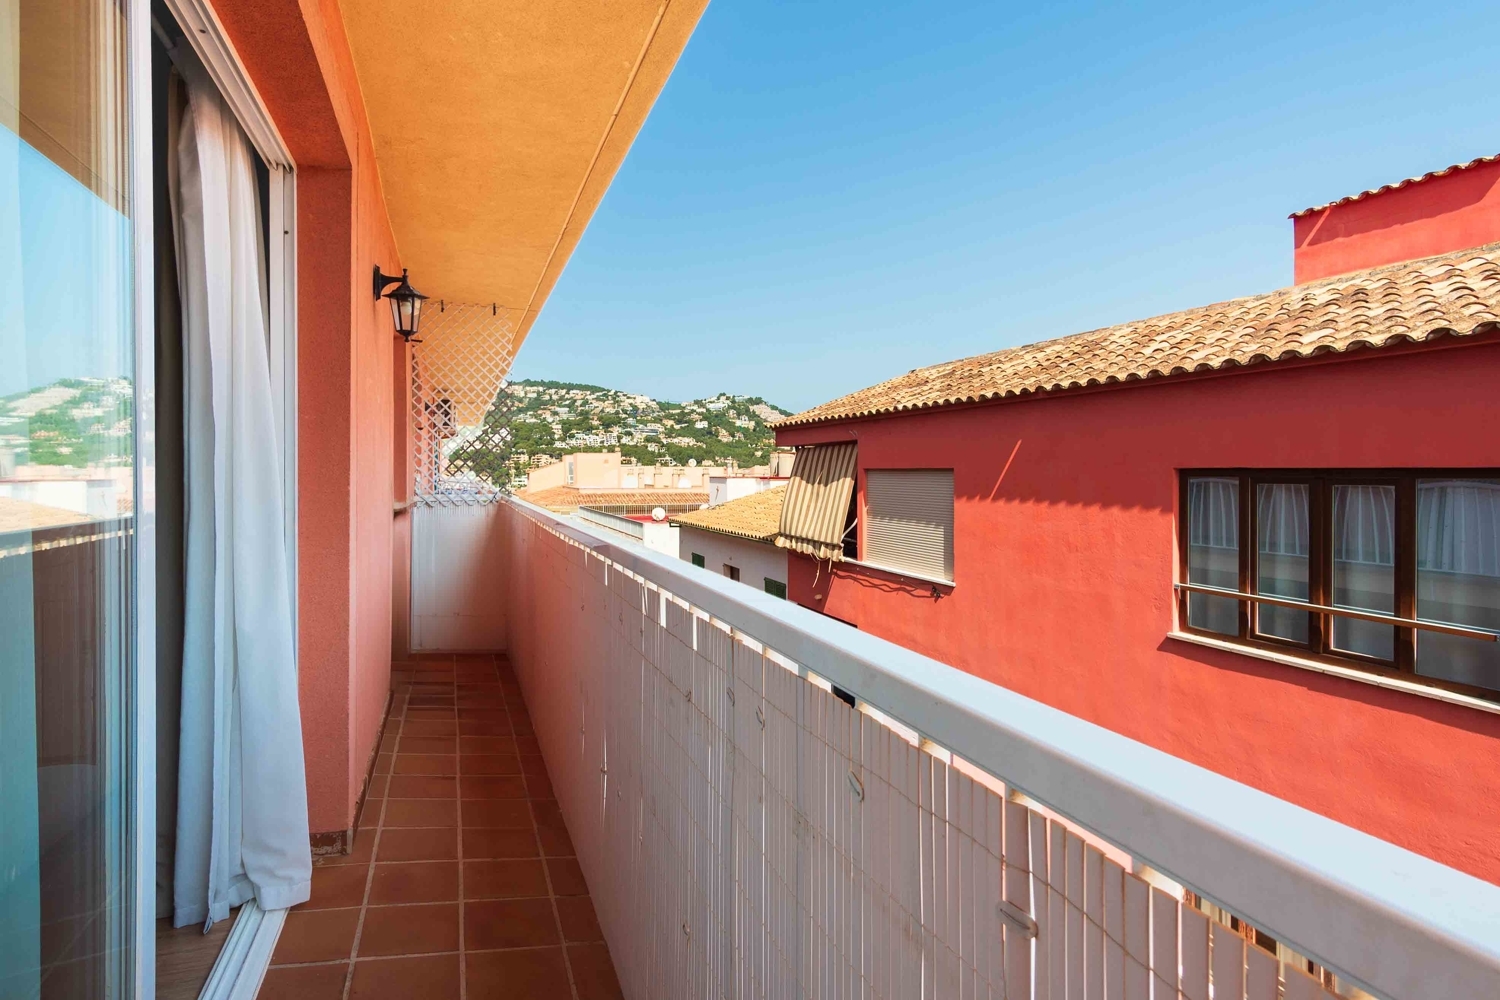 Charming renovated 2 bedroom flat with balcony, partial sea views and parking in Port Andratx